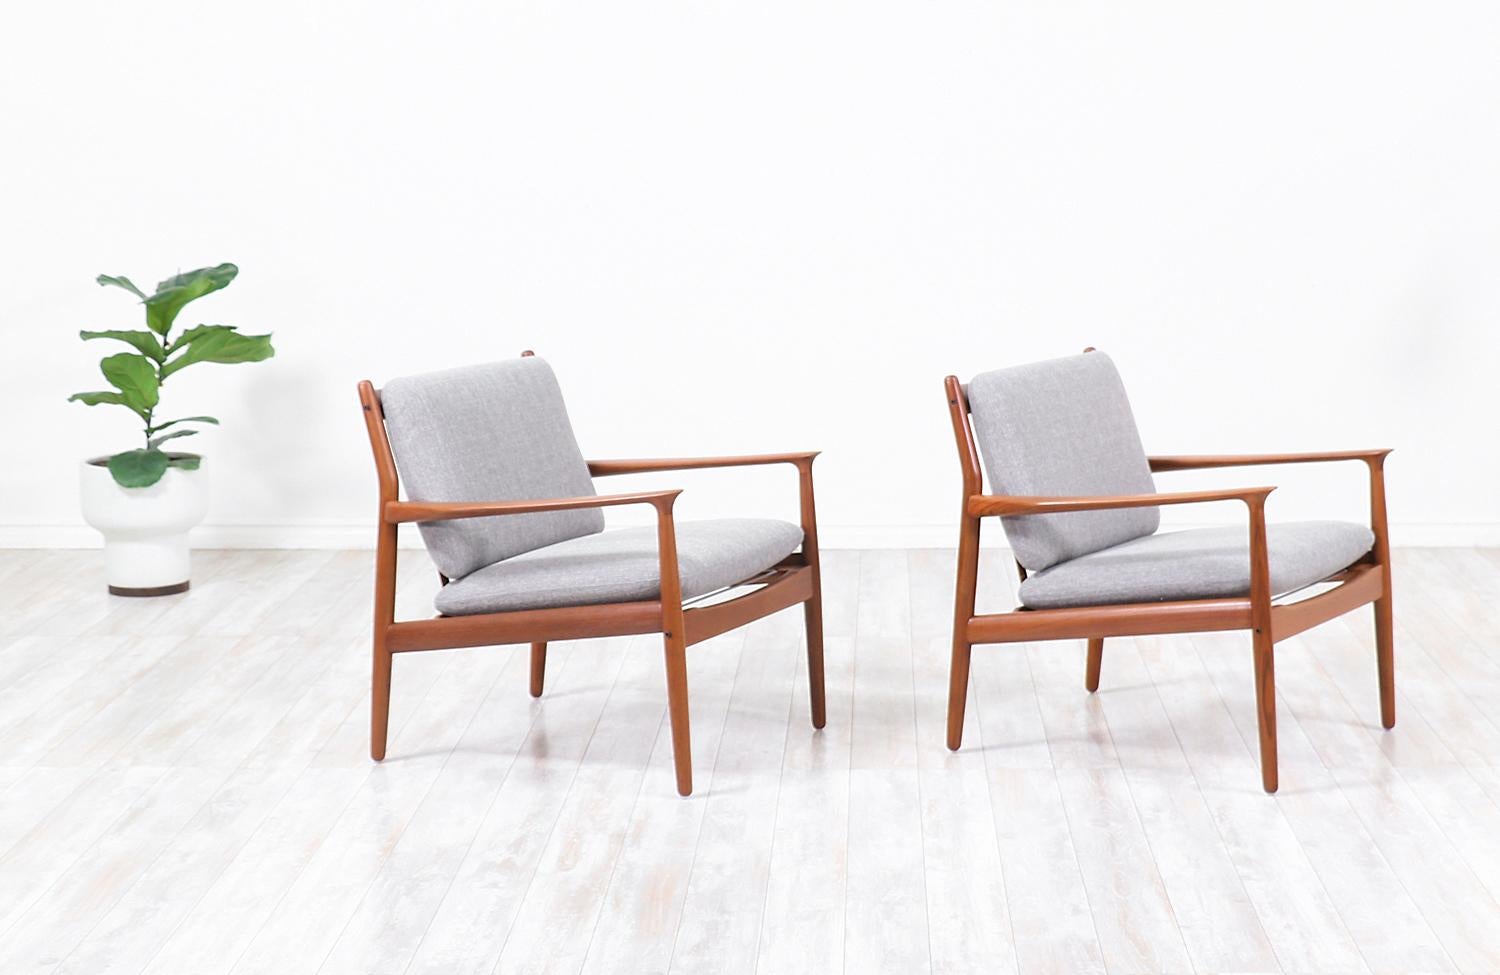 Pair of sleek modern lounge chairs designed by Svend Åge Eriksen and manufactured in Denmark by Glostrup Møbelfabrik circa 1950s. These beautiful Model GM-5 lounge chairs feature a solid teak wood frame and sculpted armrests that showcase